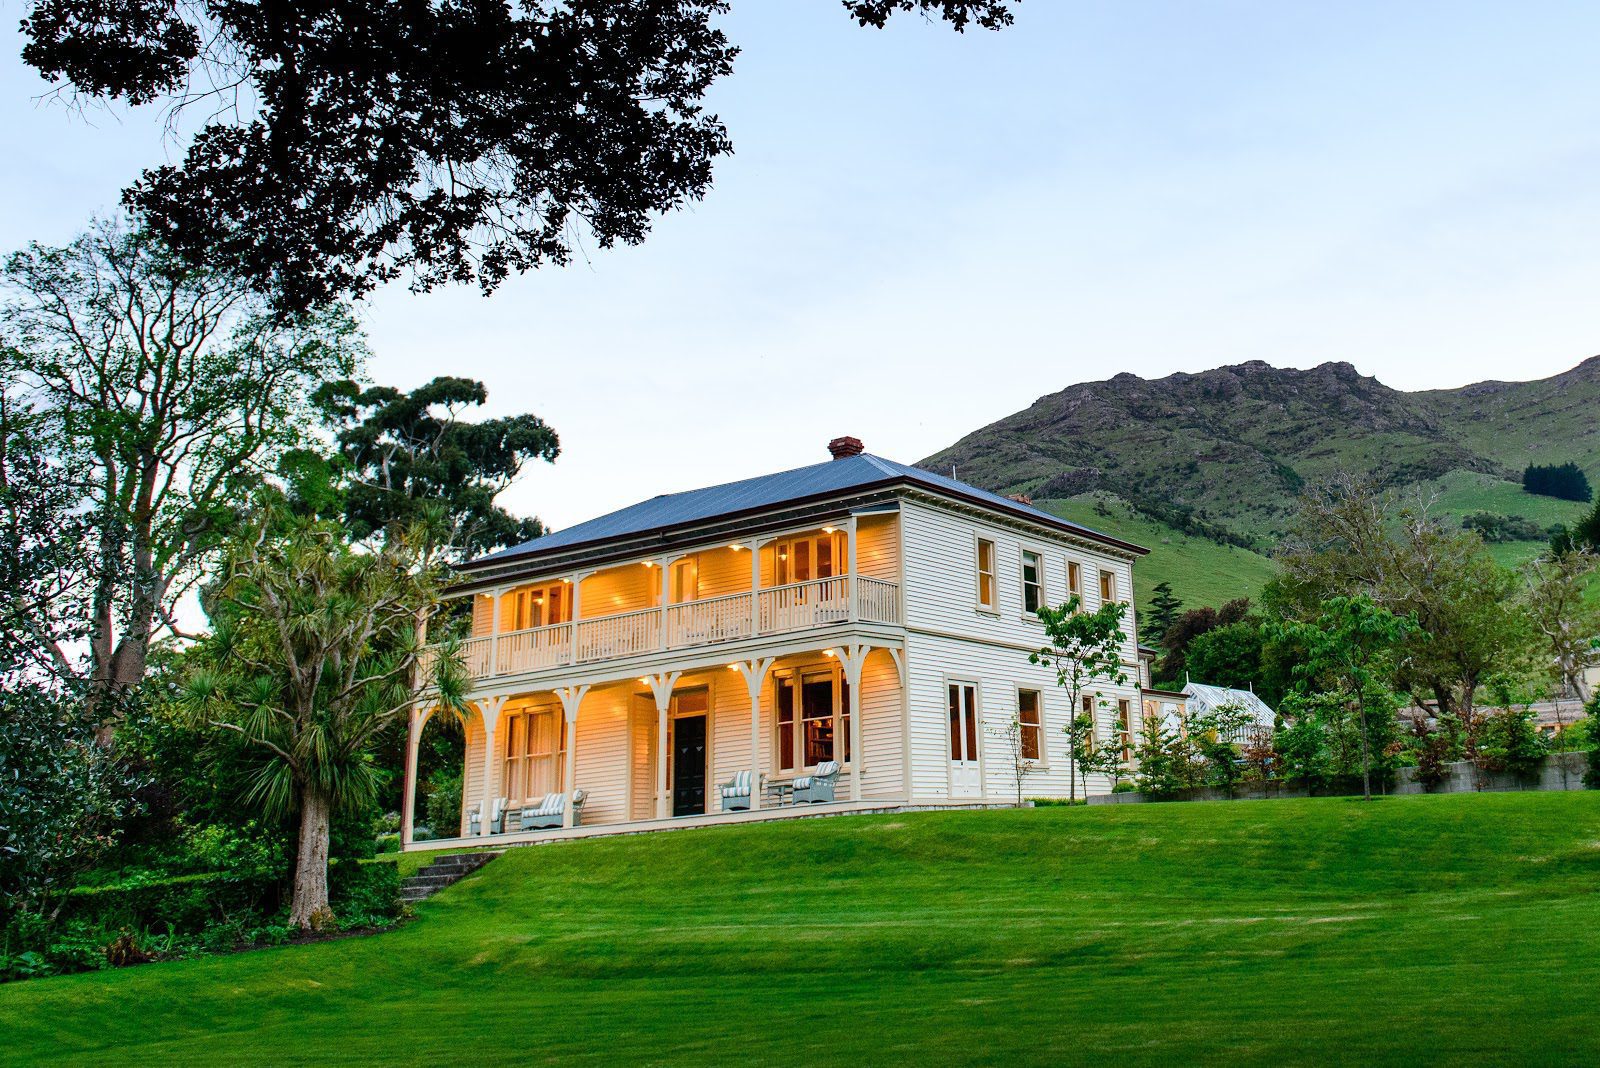 Don’t Miss These 8 Spectacular Luxury Hotels in New Zealand, Grand Hotels